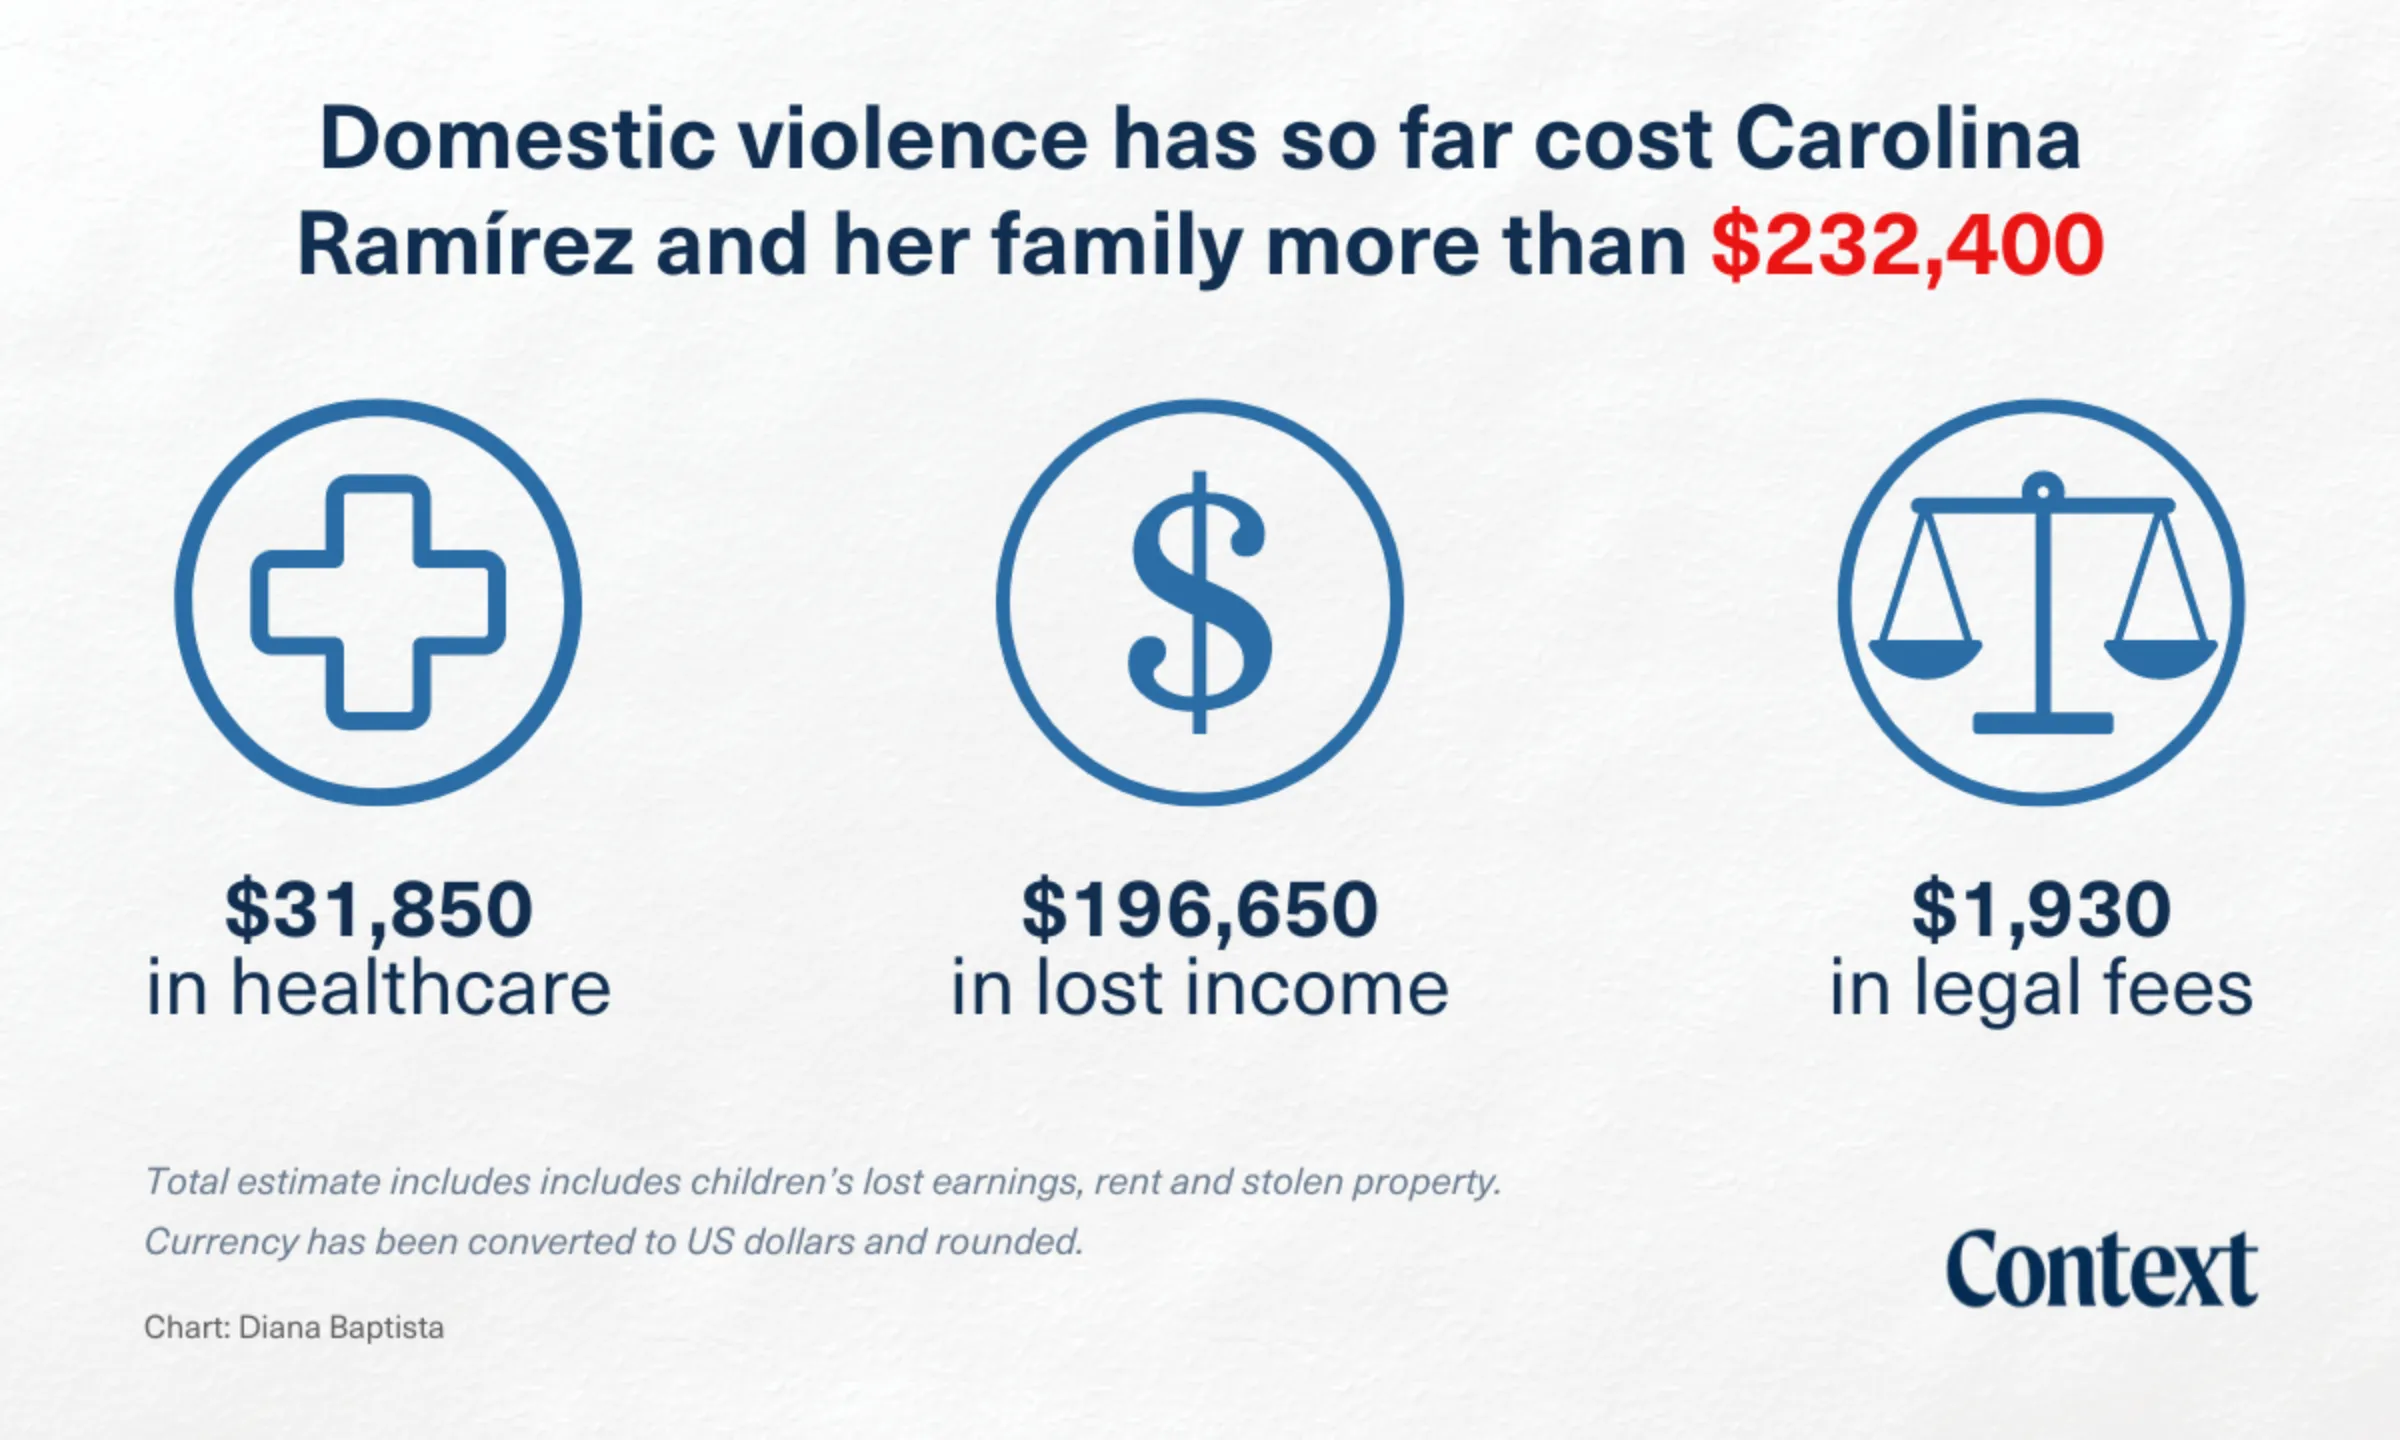 Chart showing the estimated cost of domestic violence so far on Carolina Ramírez and her family. Thomson Reuters Foundation/Diana Baptista